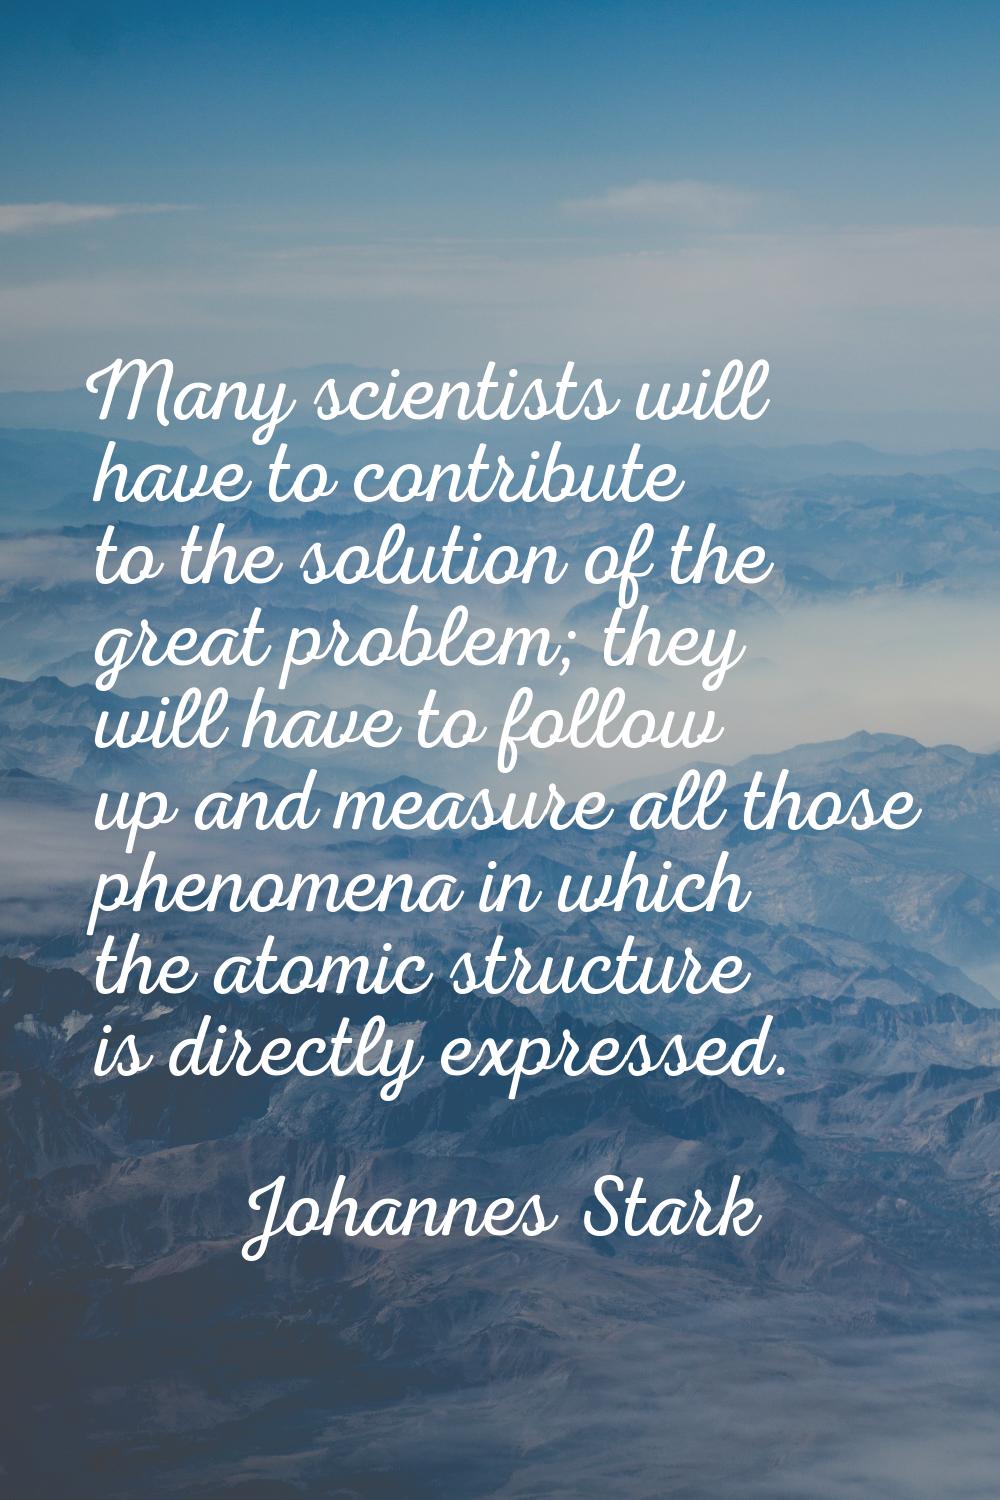 Many scientists will have to contribute to the solution of the great problem; they will have to fol